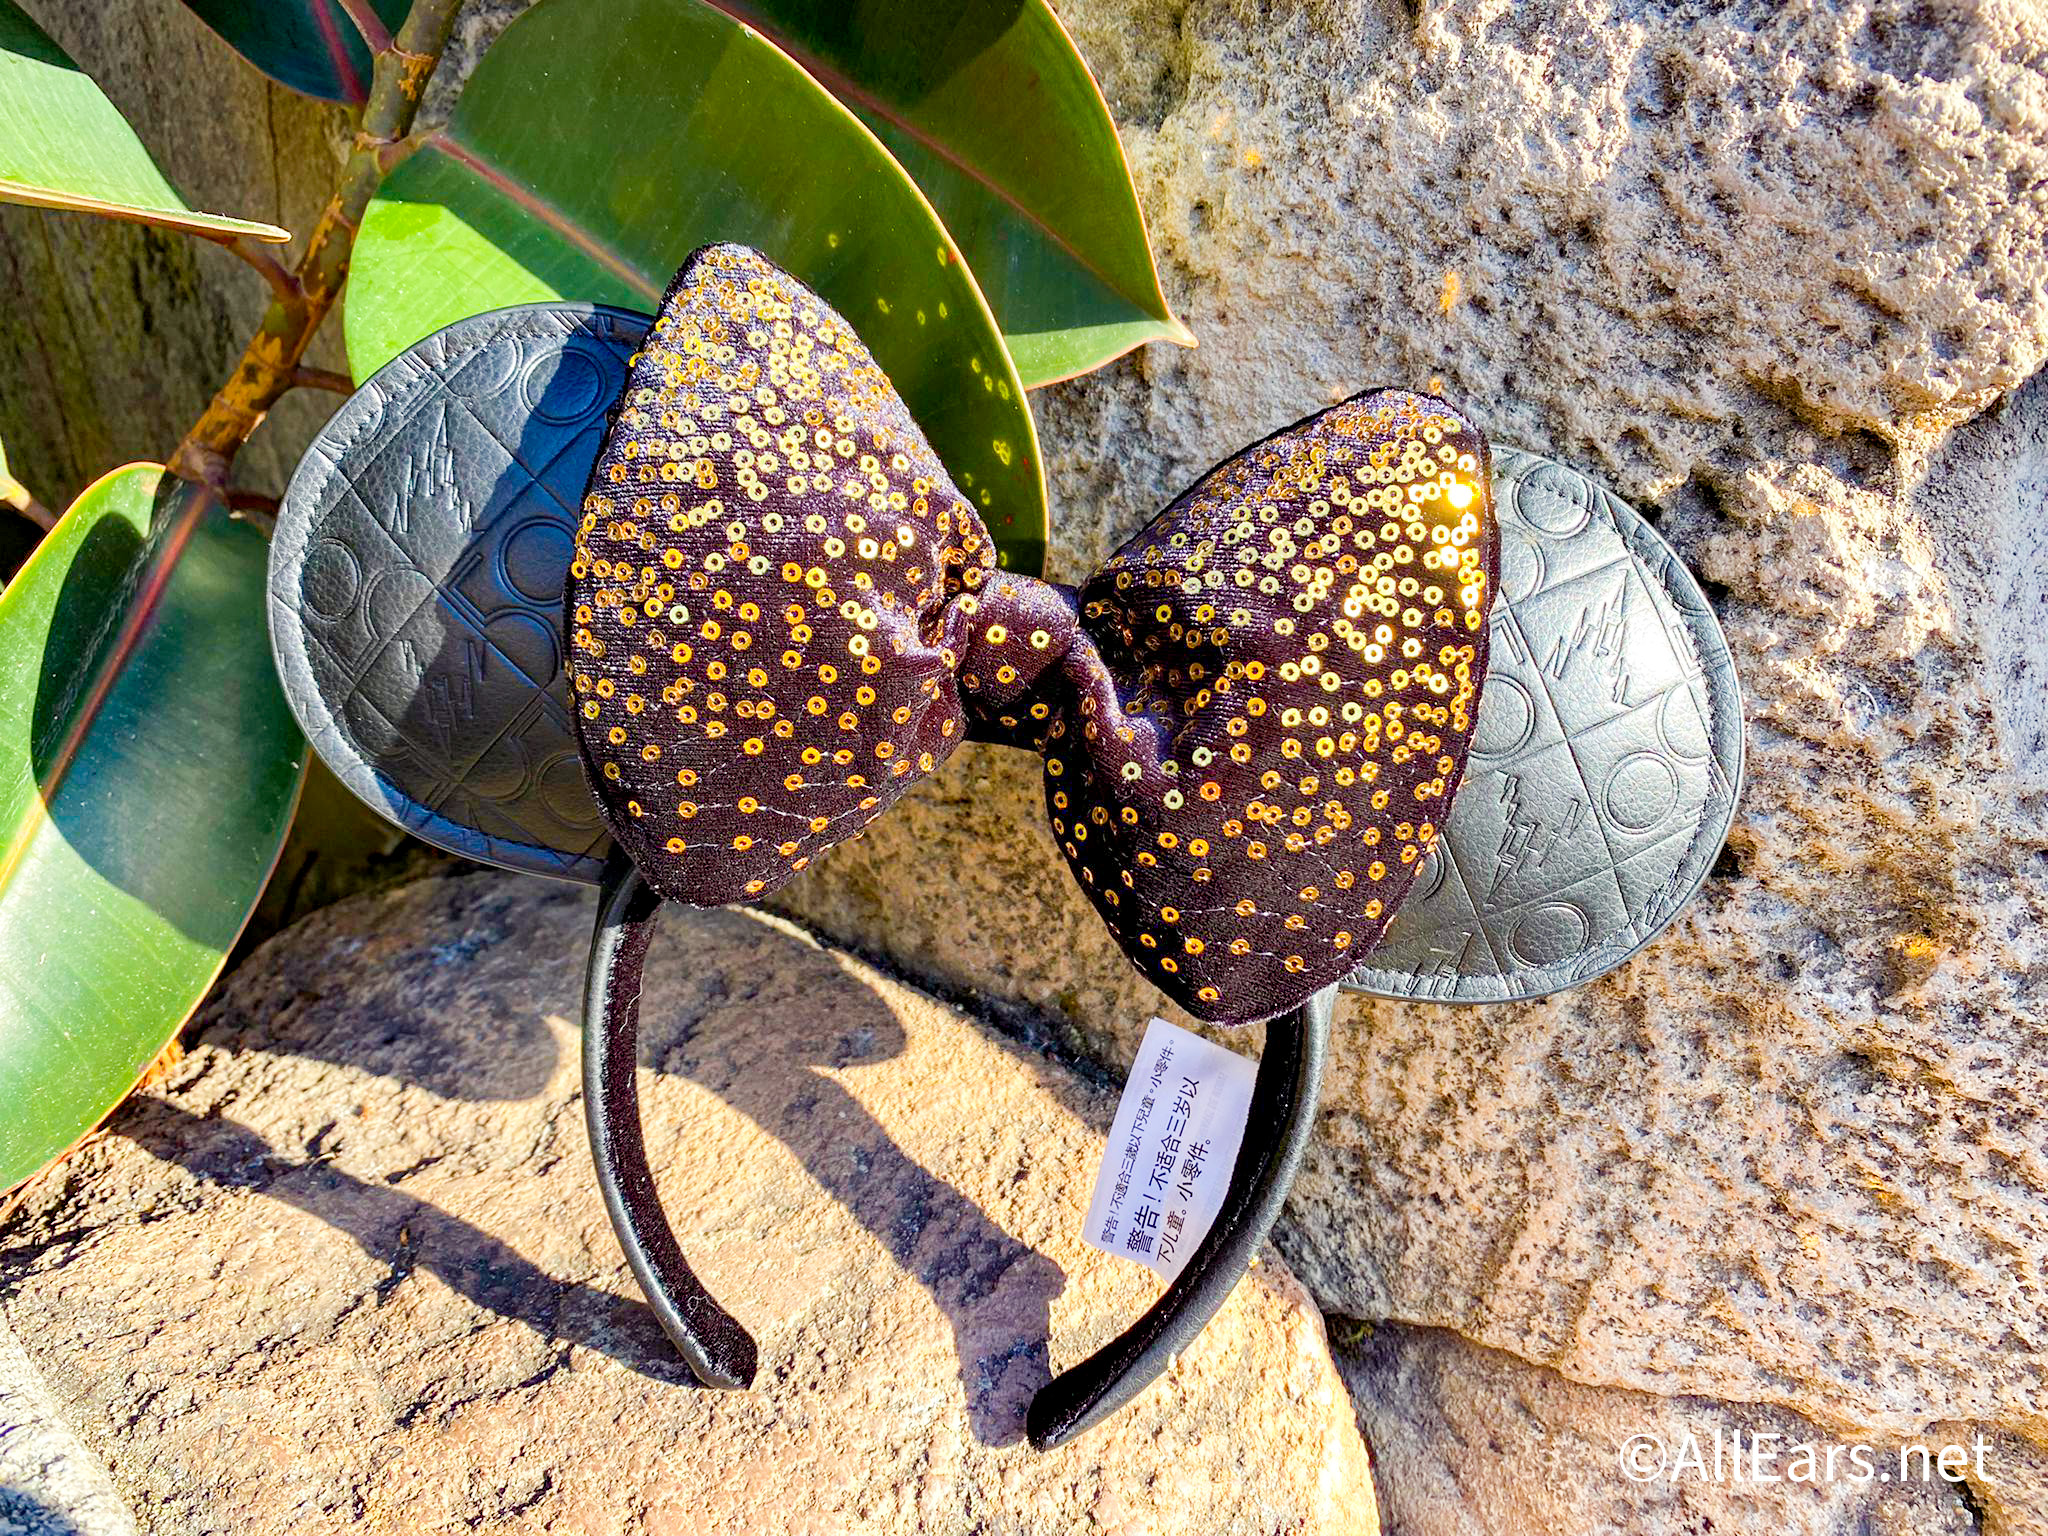 The 50th Anniversary Ears That WON'T Cost You Hundreds of Dollars